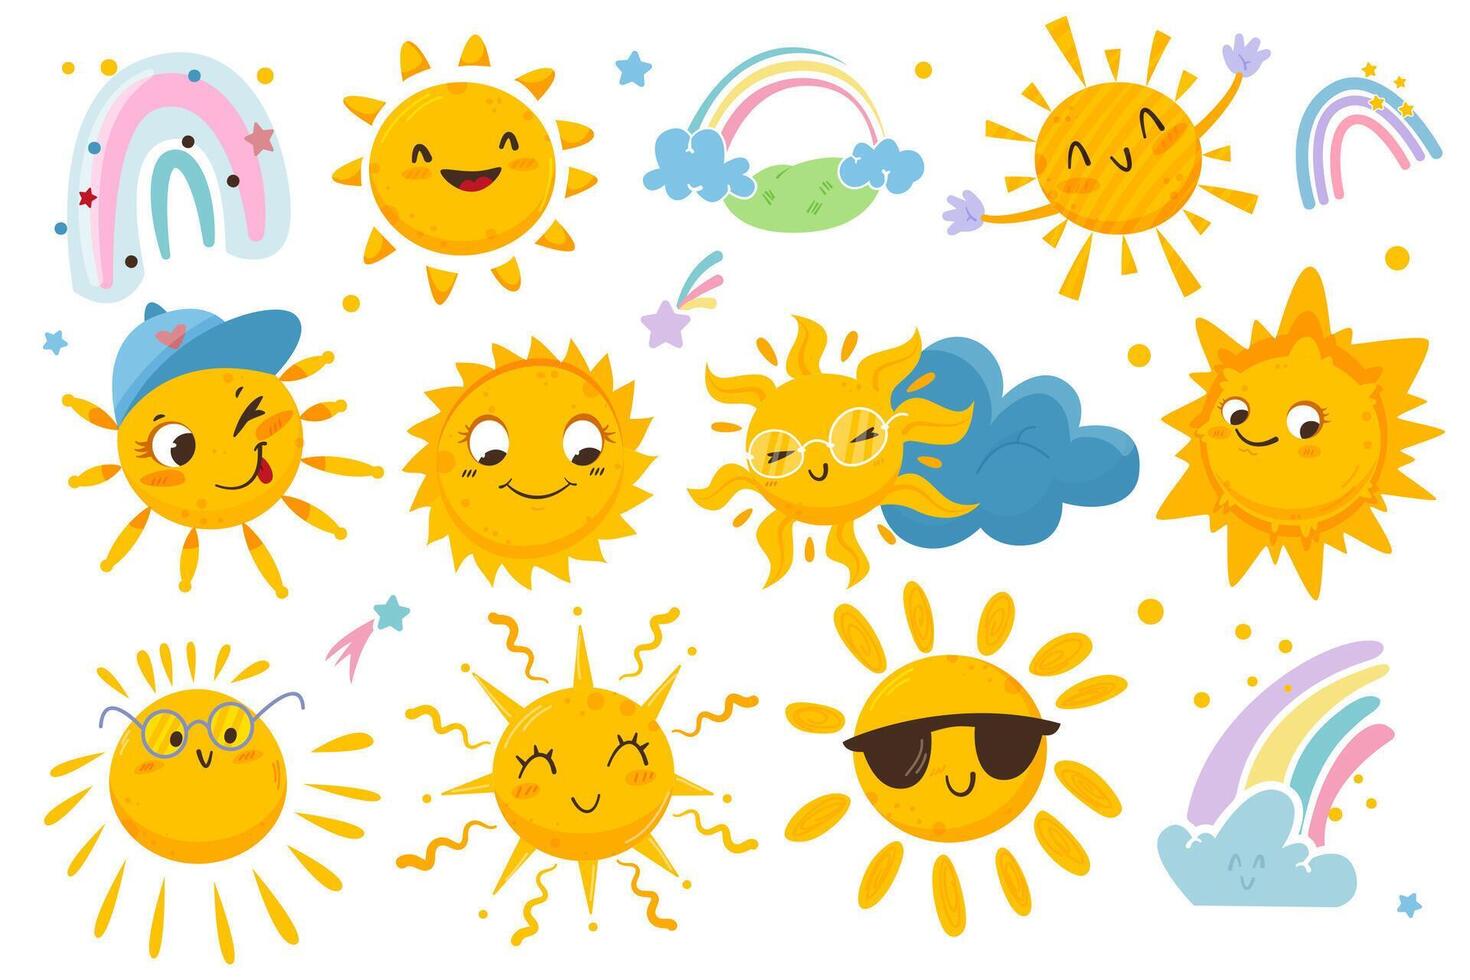 Cute sun flat stickers set with happy emotions, clouds and colorful rainbow. Funny characters in sunglasses, cap for kids. Cartoon sunny smiley icons. Yellow suns with positive expression faces vector